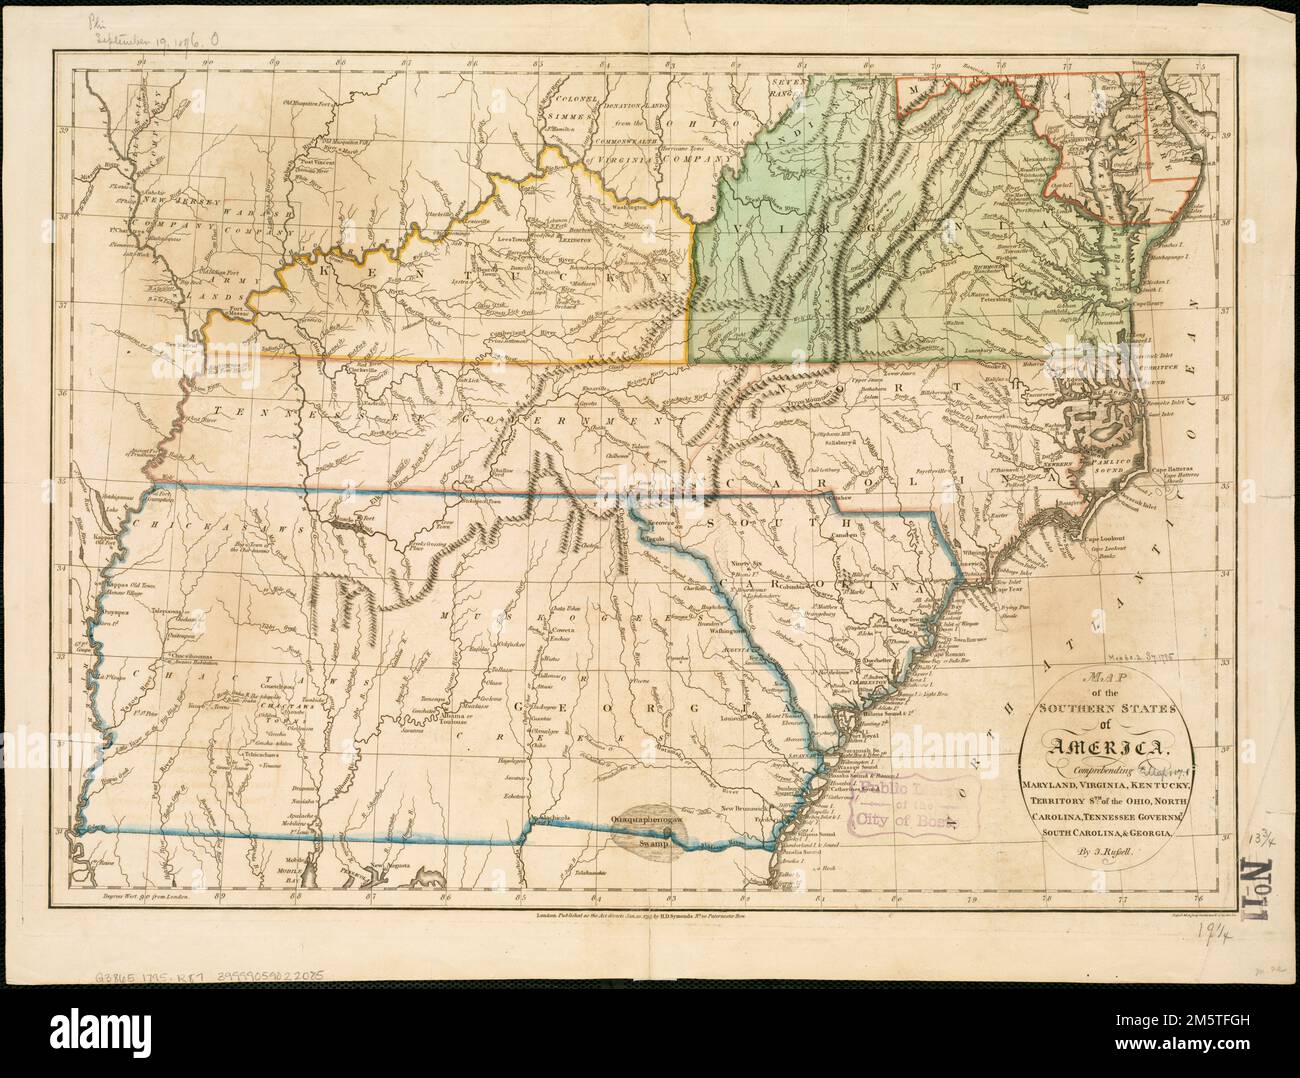 Map of the southern states of America, comprehending Maryland, Virginia, Kentucky, Territory s'th of the Ohio, North Carolina, Tennessee Governm't., South Carolina, & Georgia. Relief shown pictorially. 'Russell del. et sculp.' From: An historical, geographical, commercial, and philosophical view of the United States of America / W. Winterbotham. New York : Printed by Tiebout and O'Brien, for J. Reid, 1796. Vol. 3, p. 1. Prime meridian: London.... , Southern United States  ,area Stock Photo